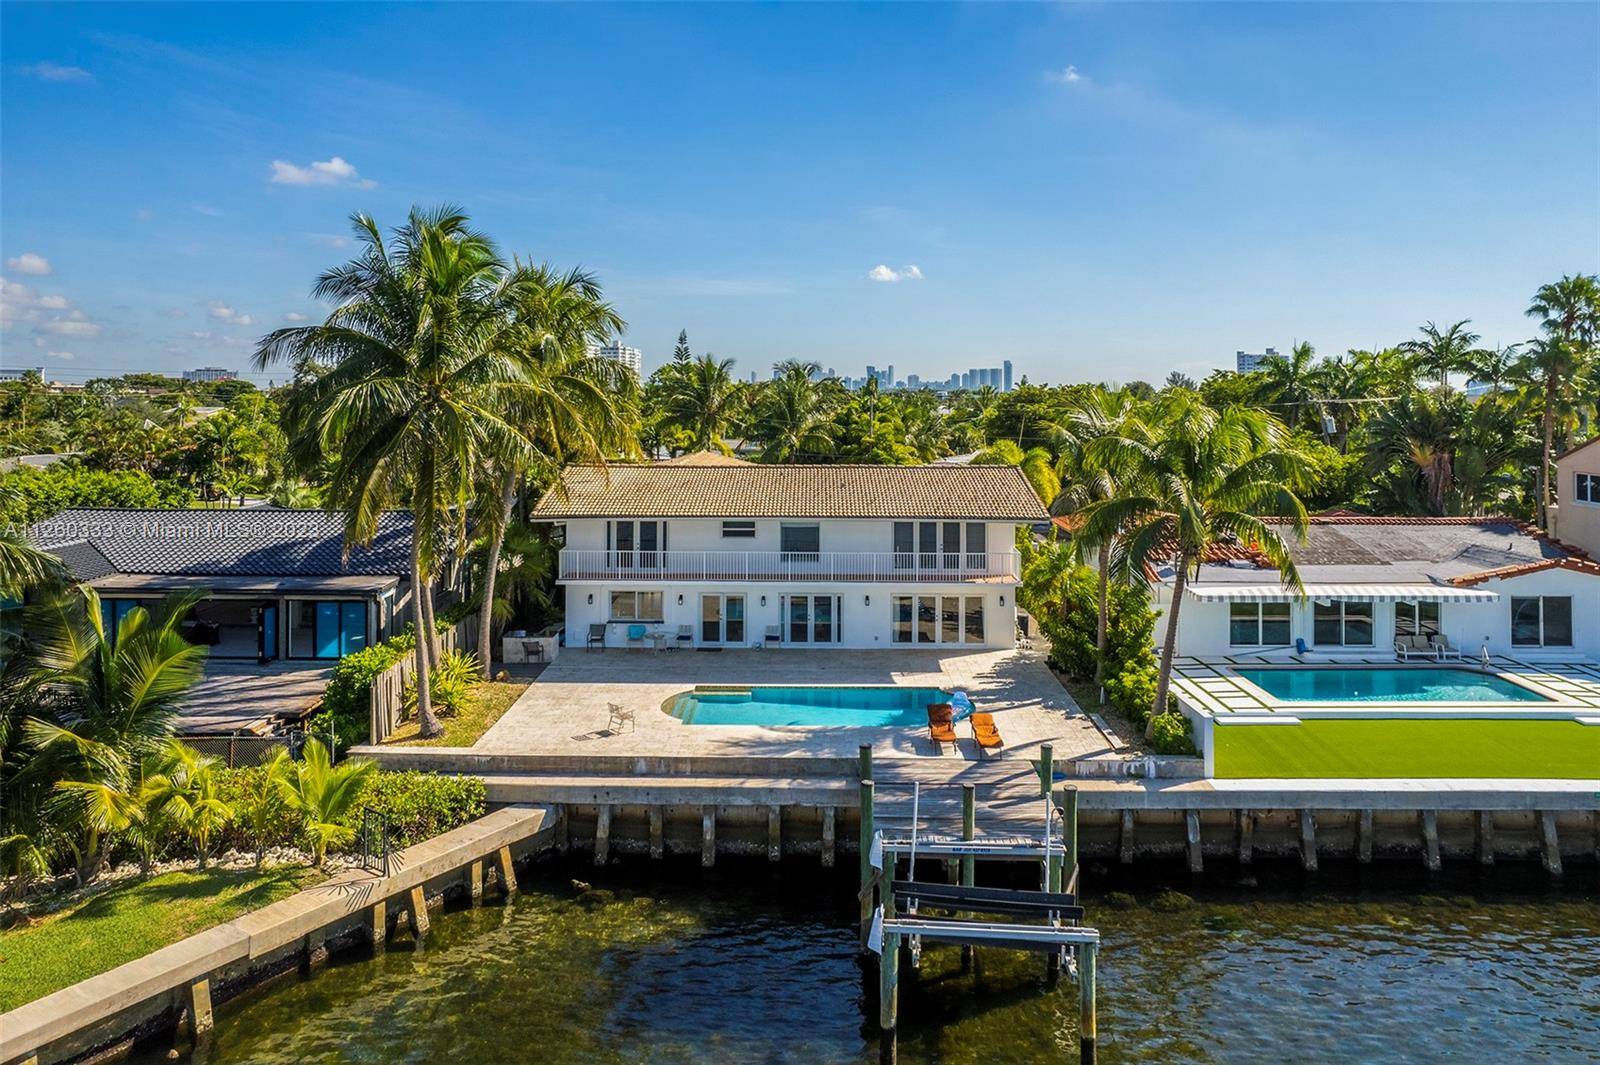 Two story elegant bayfront mansion, built in 1968 featuring high ceilings, formal floor plan, great custom built office, large family room, high impact resistant glass doors and windows, major upgrades ...